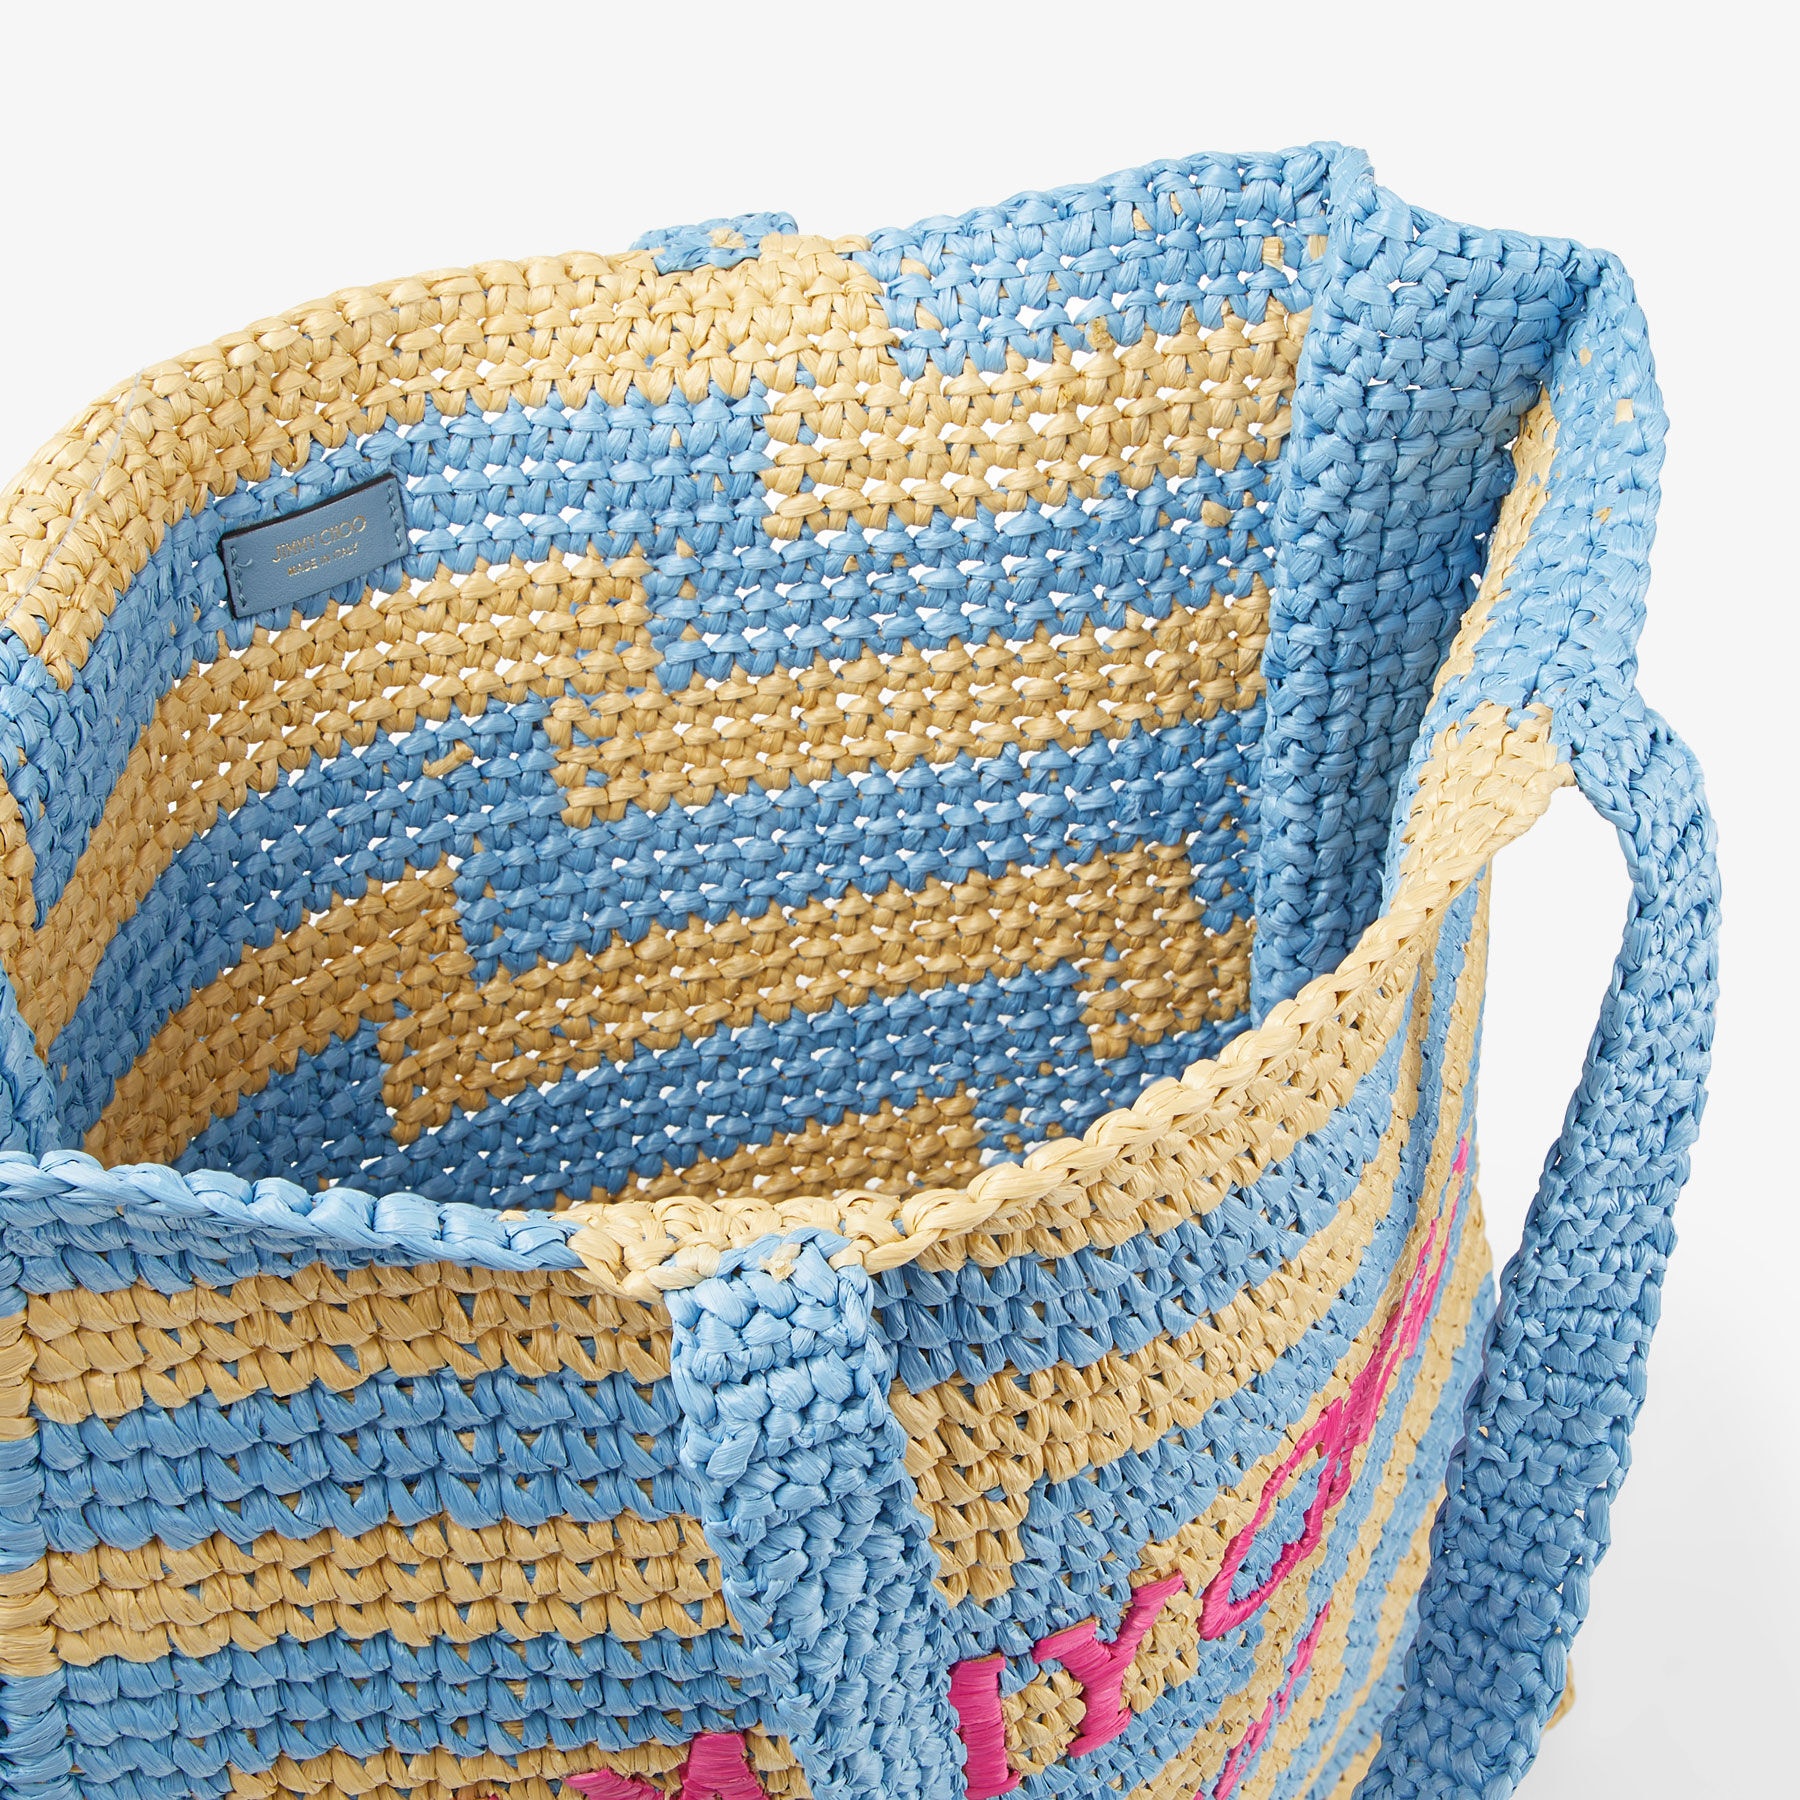 Beach Tote S
Natural and Smoky Blue Avenue Crochet Tote Bag - 4